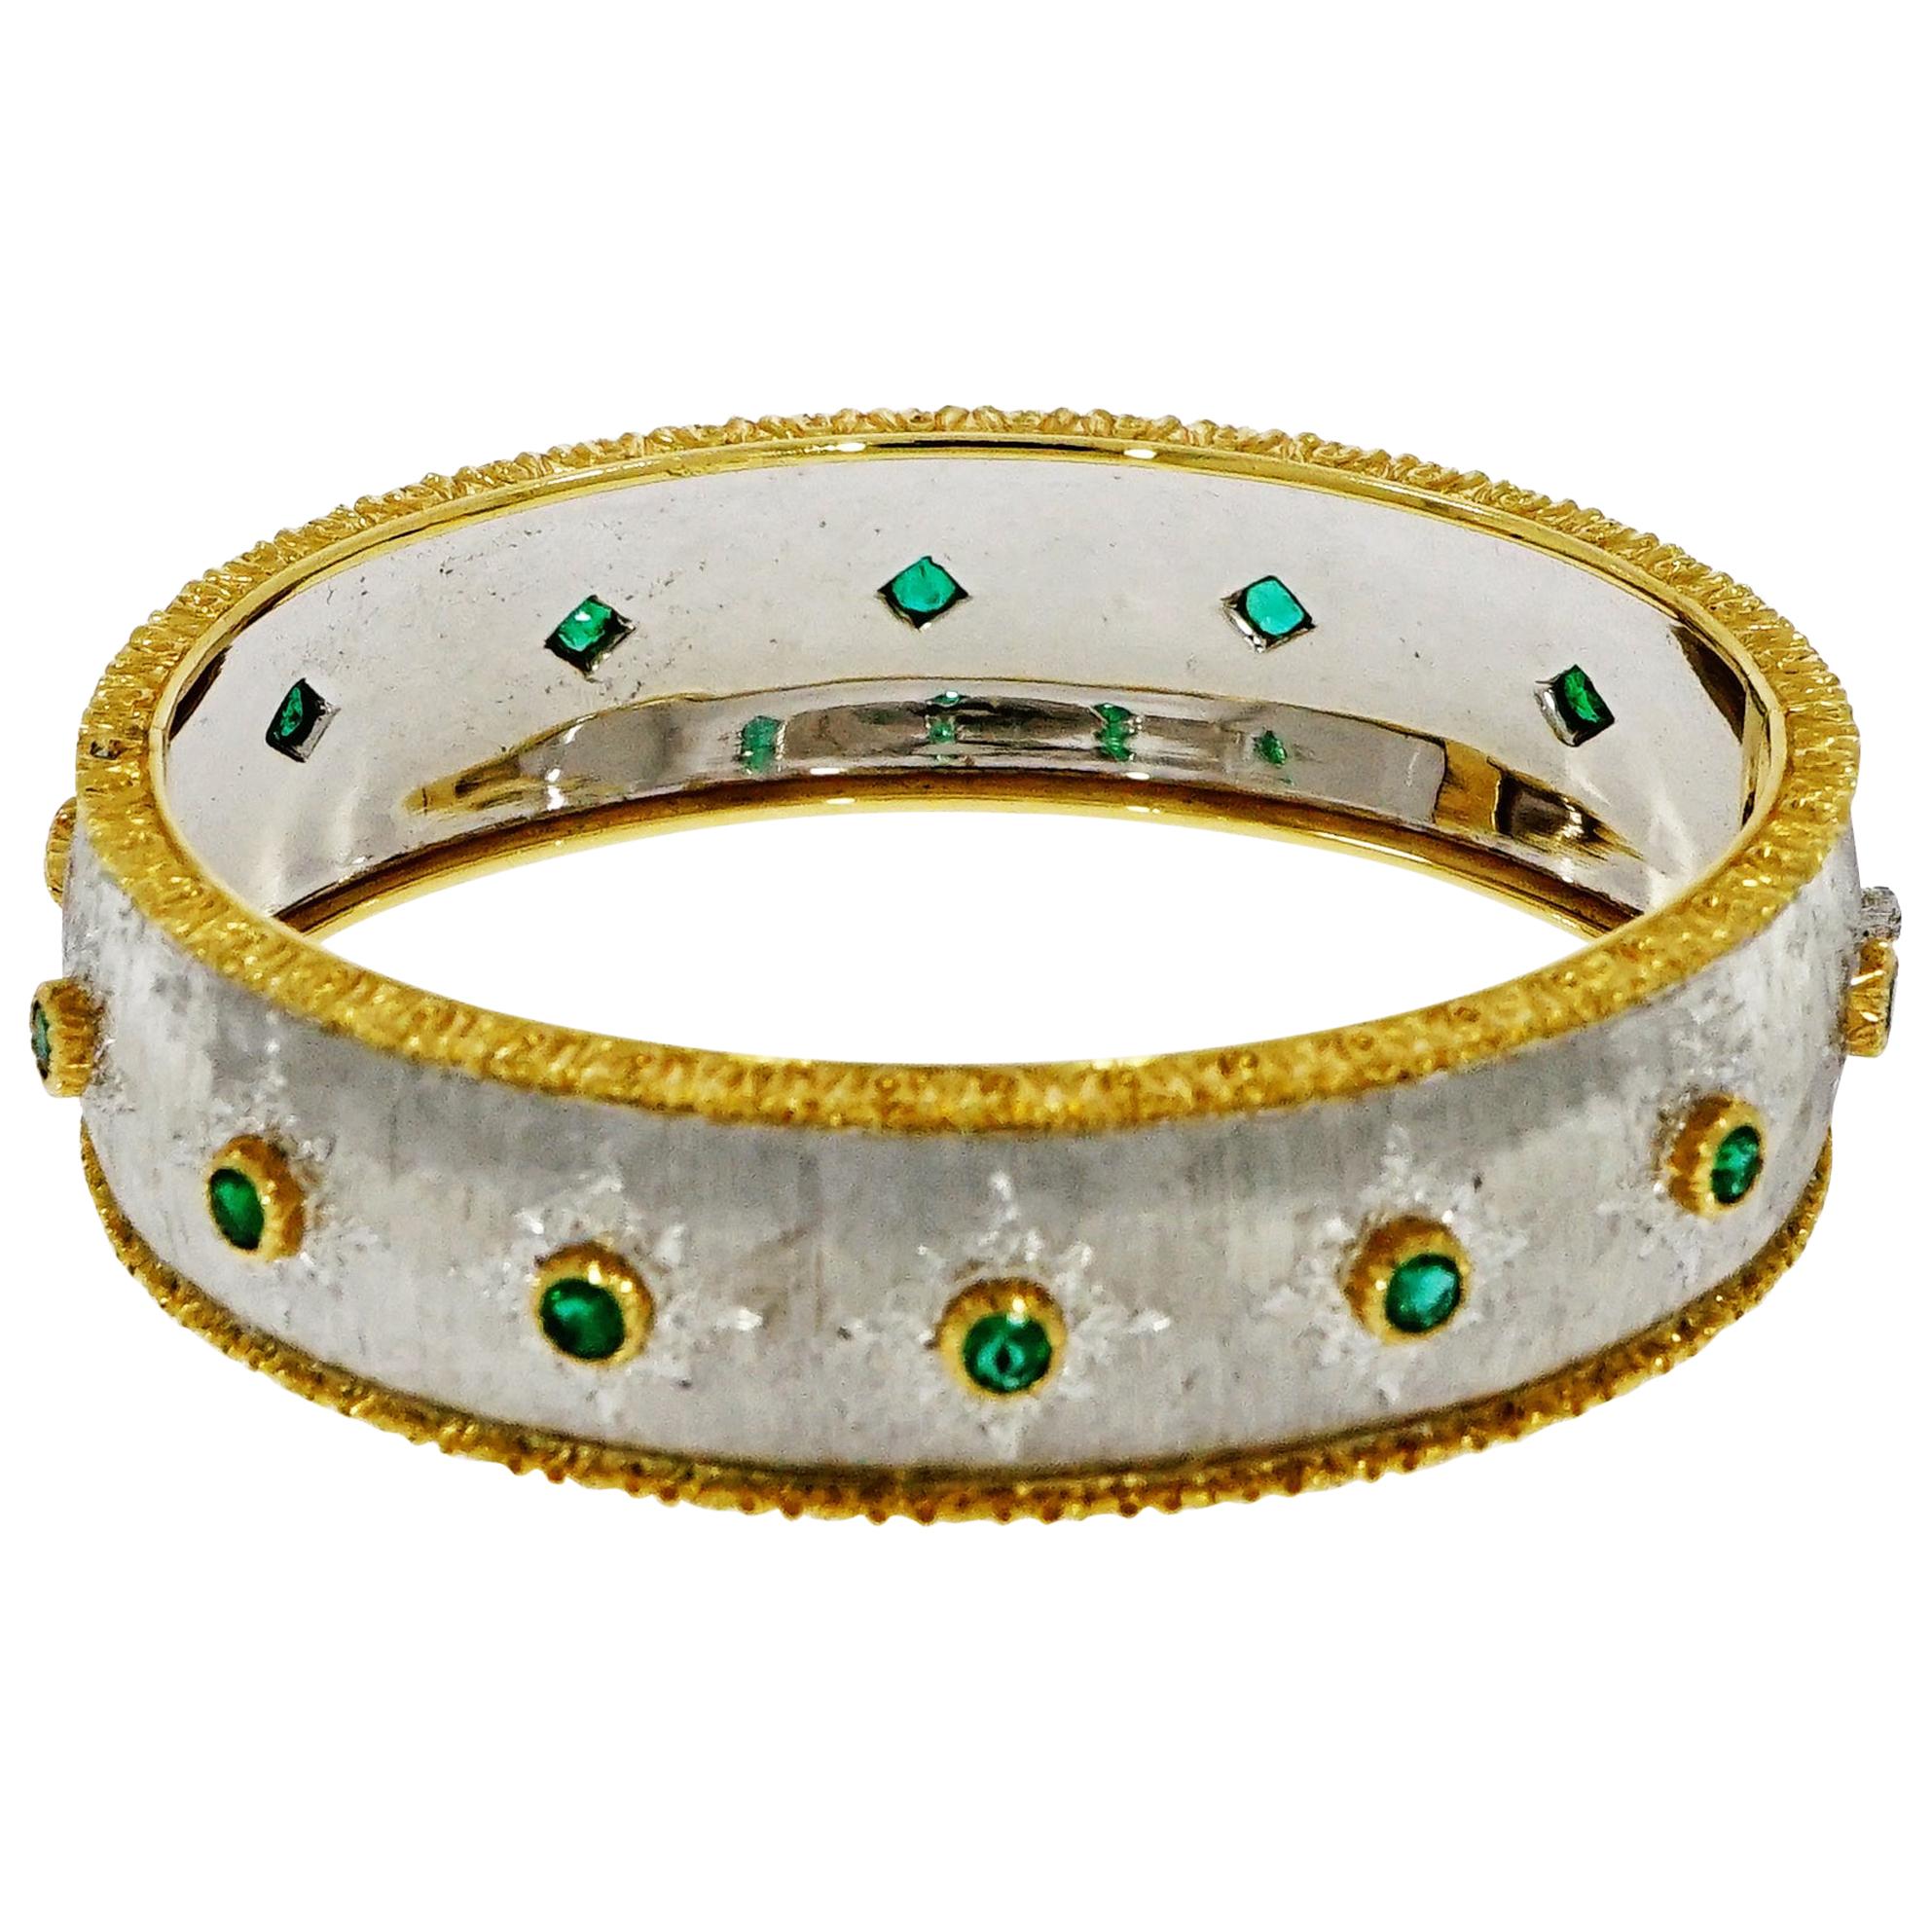 Buccellati White and Yellow Gold Bangle Bracelet with Emeralds